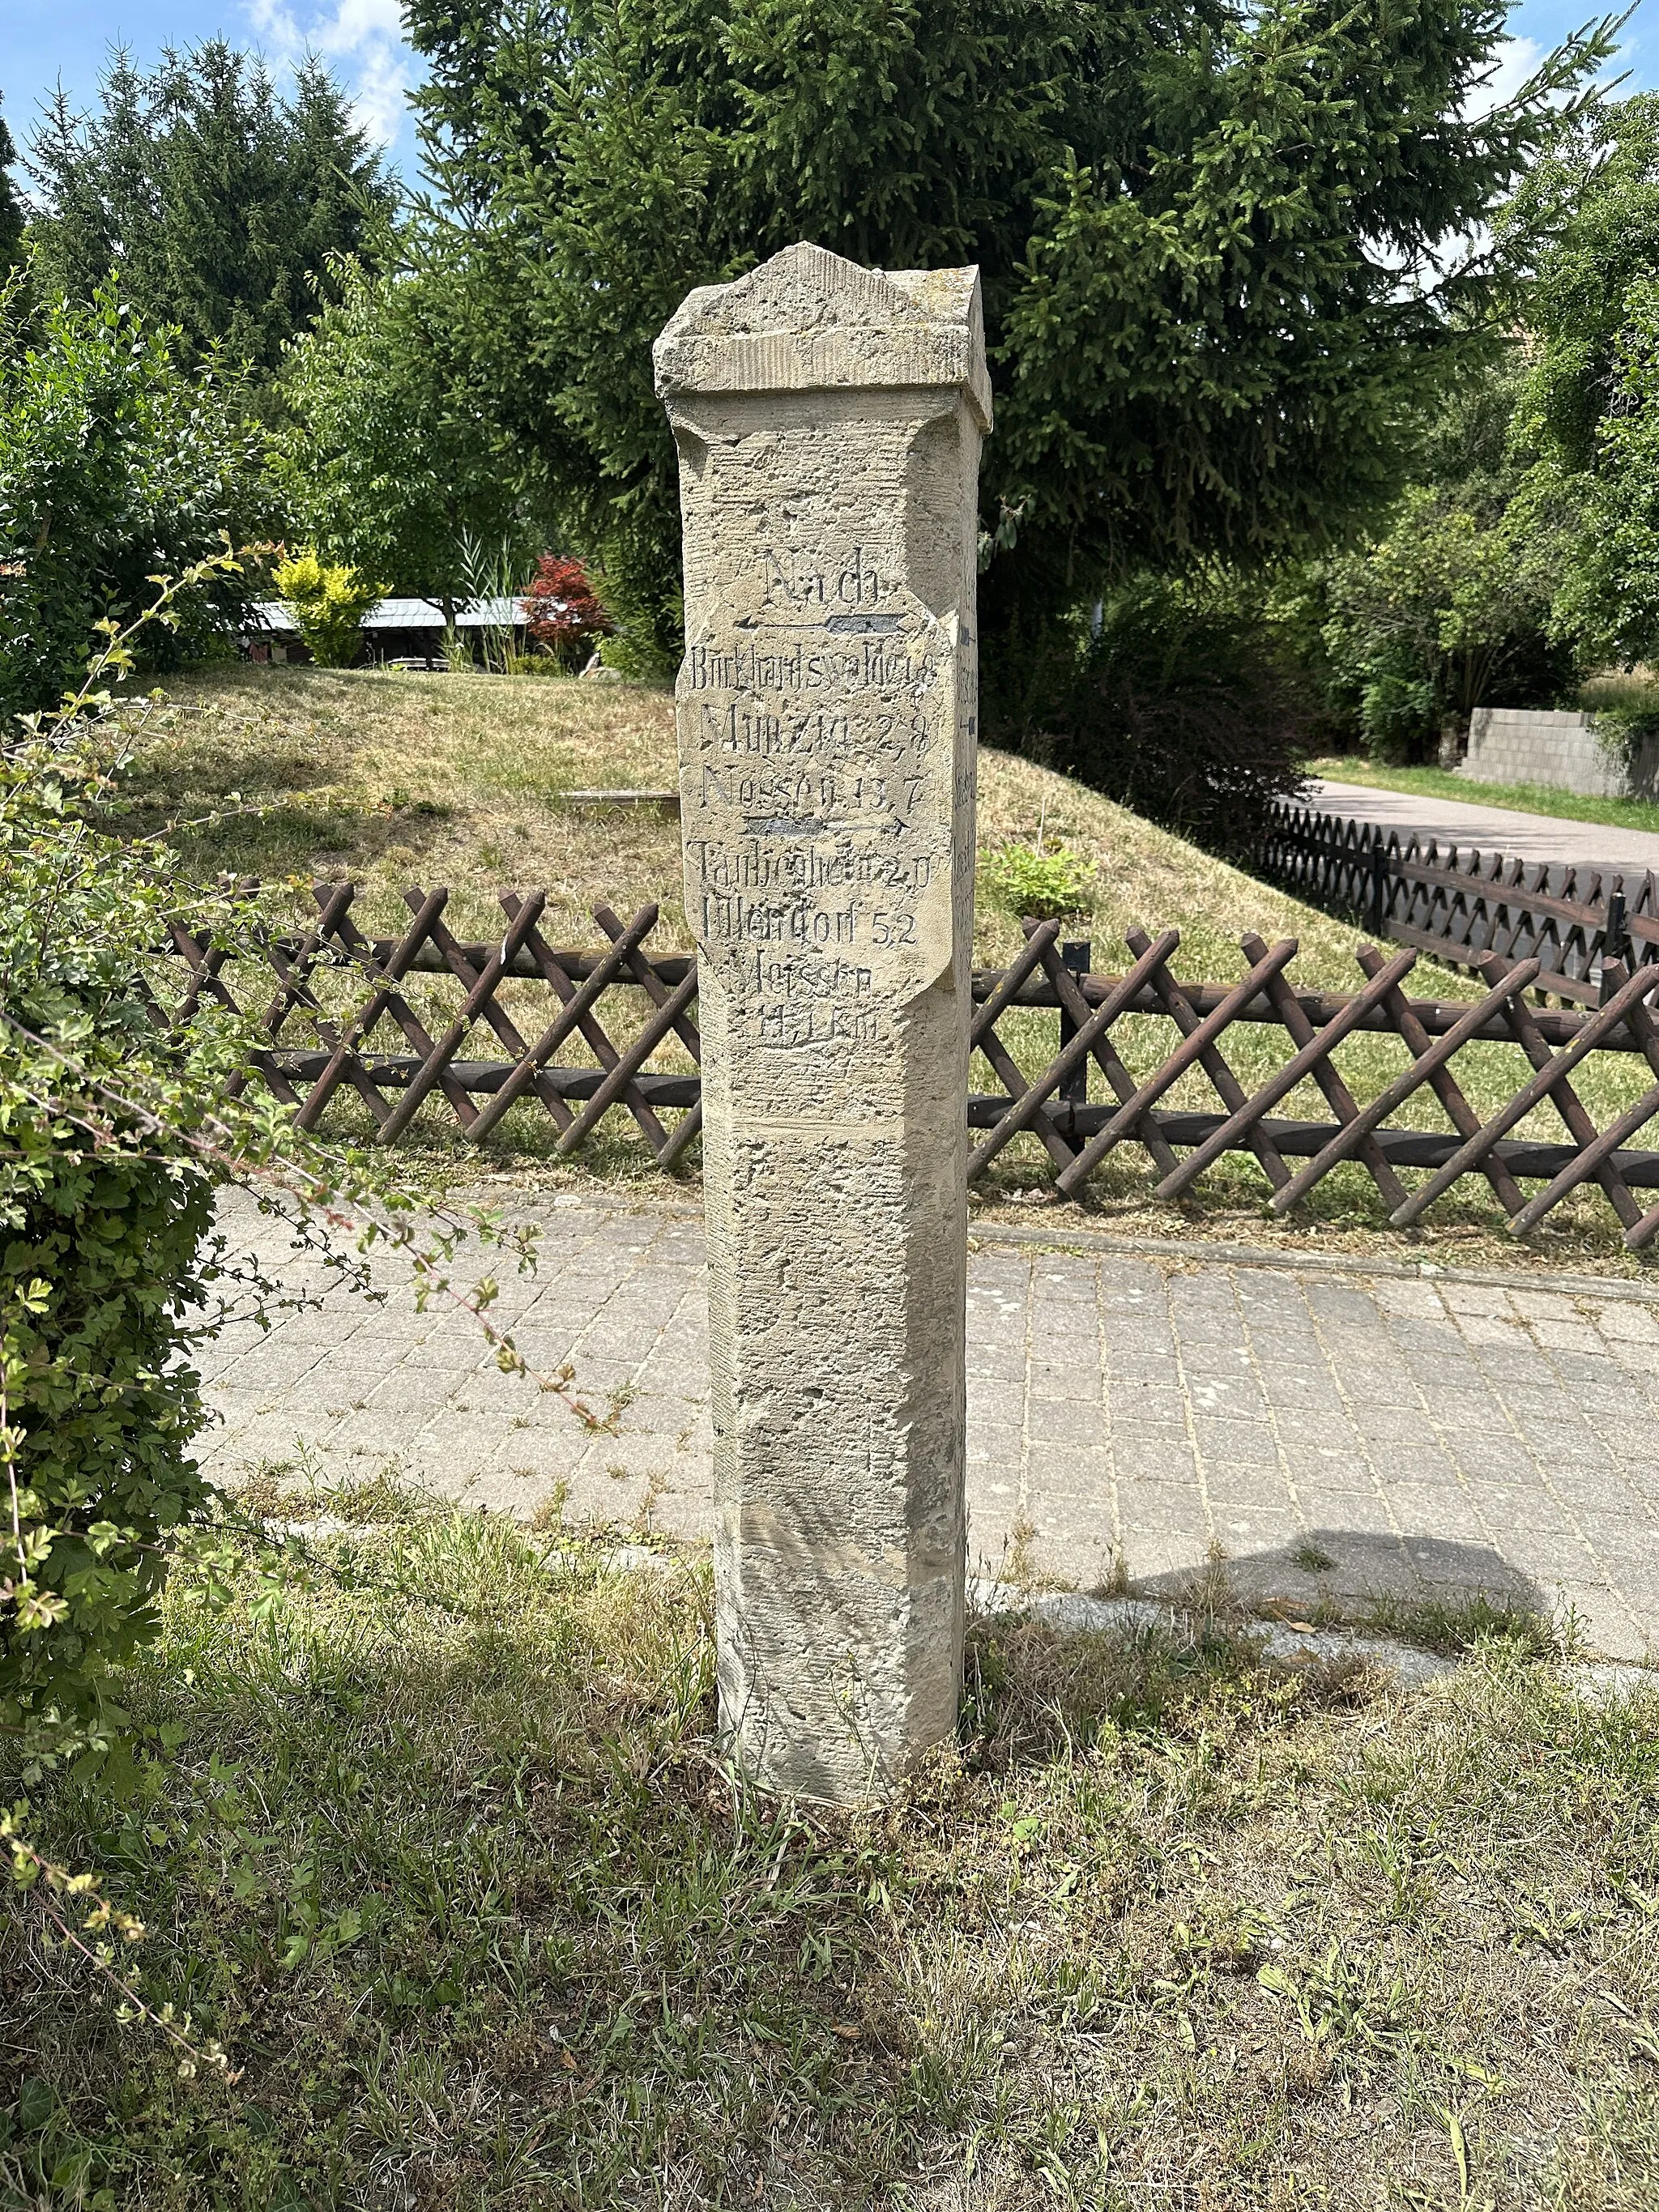 Photo showing: This media shows the protected monument of Saxony with the ID 09304243 KDSa/09304243(other).